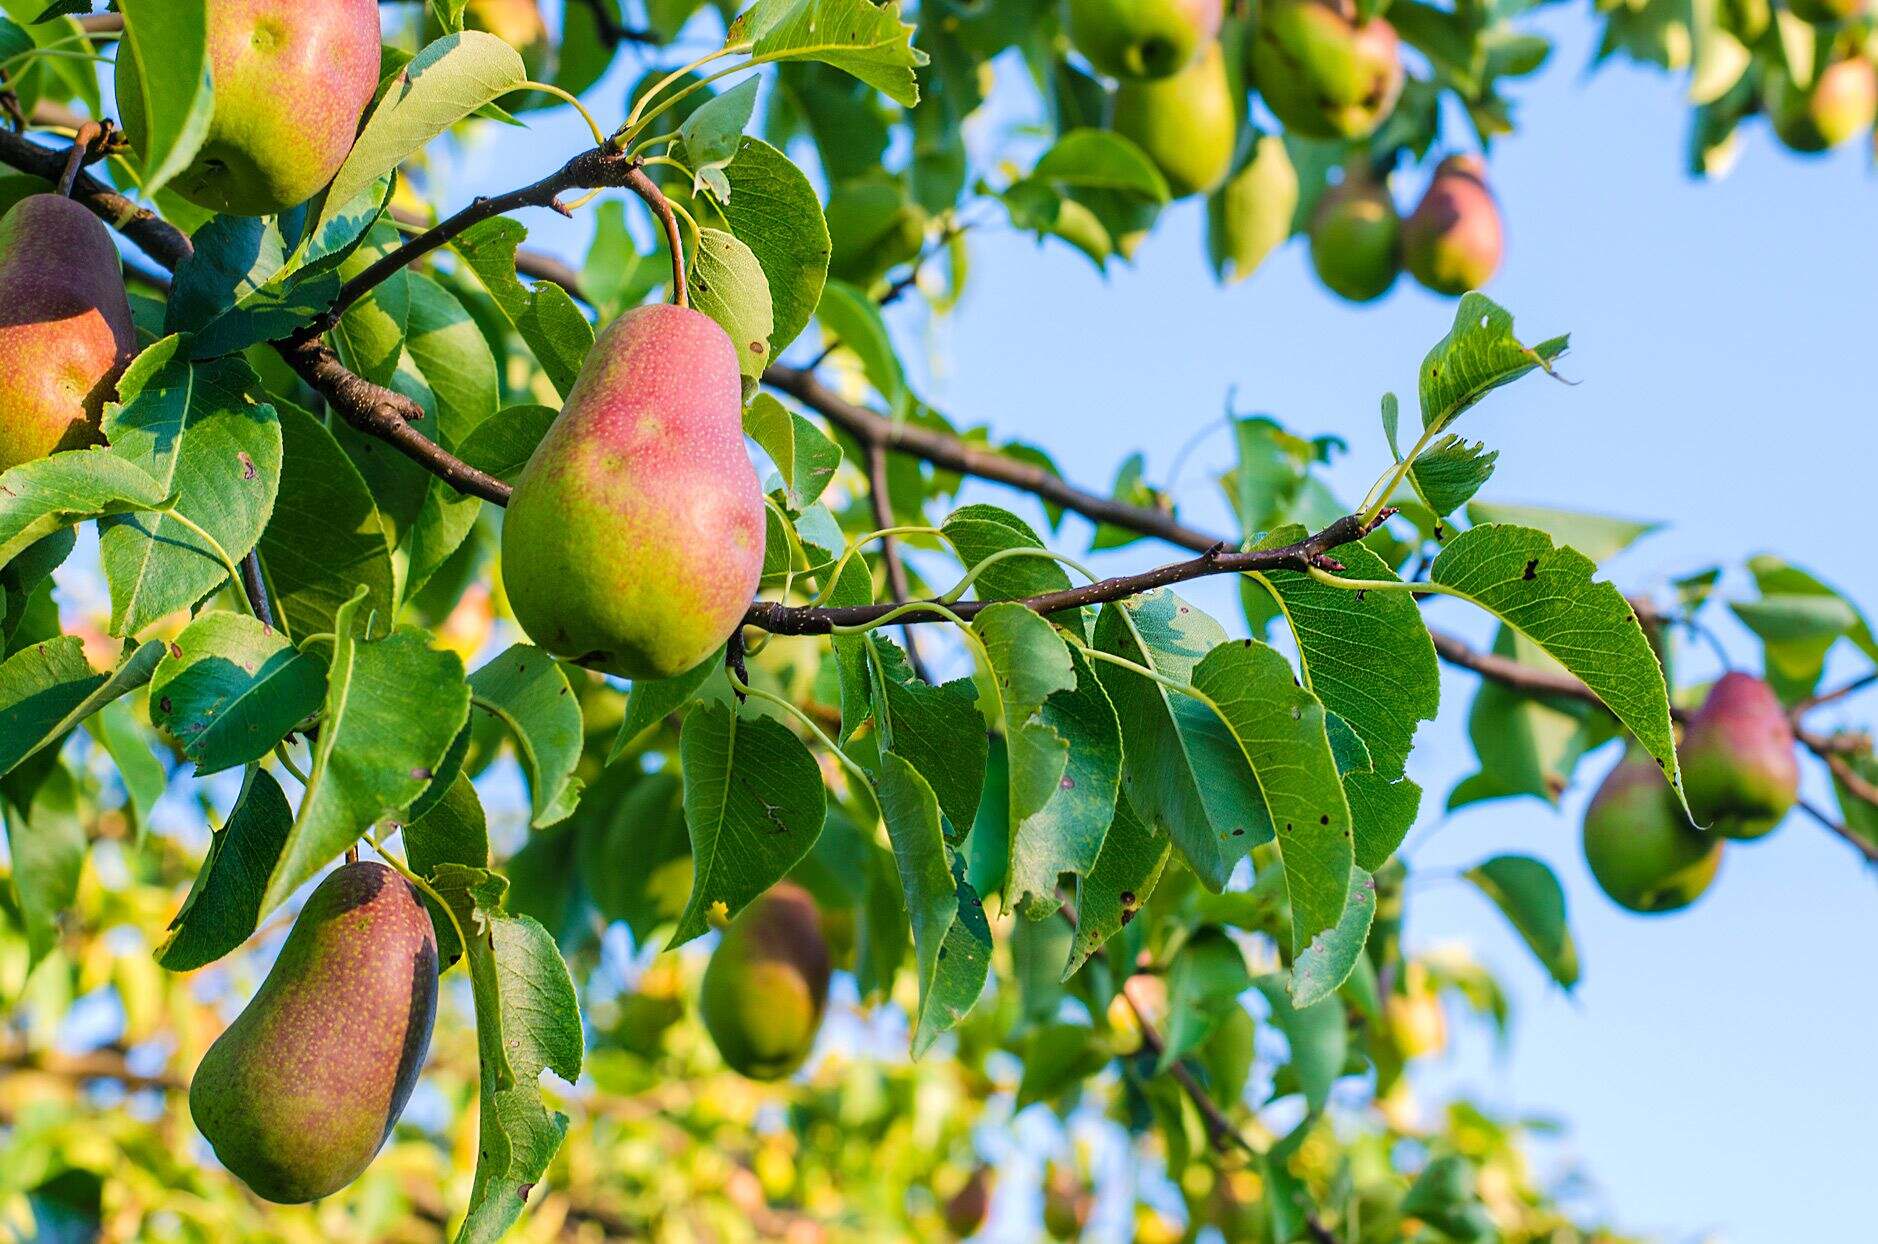 How To Grow A Pear Tree From Seed